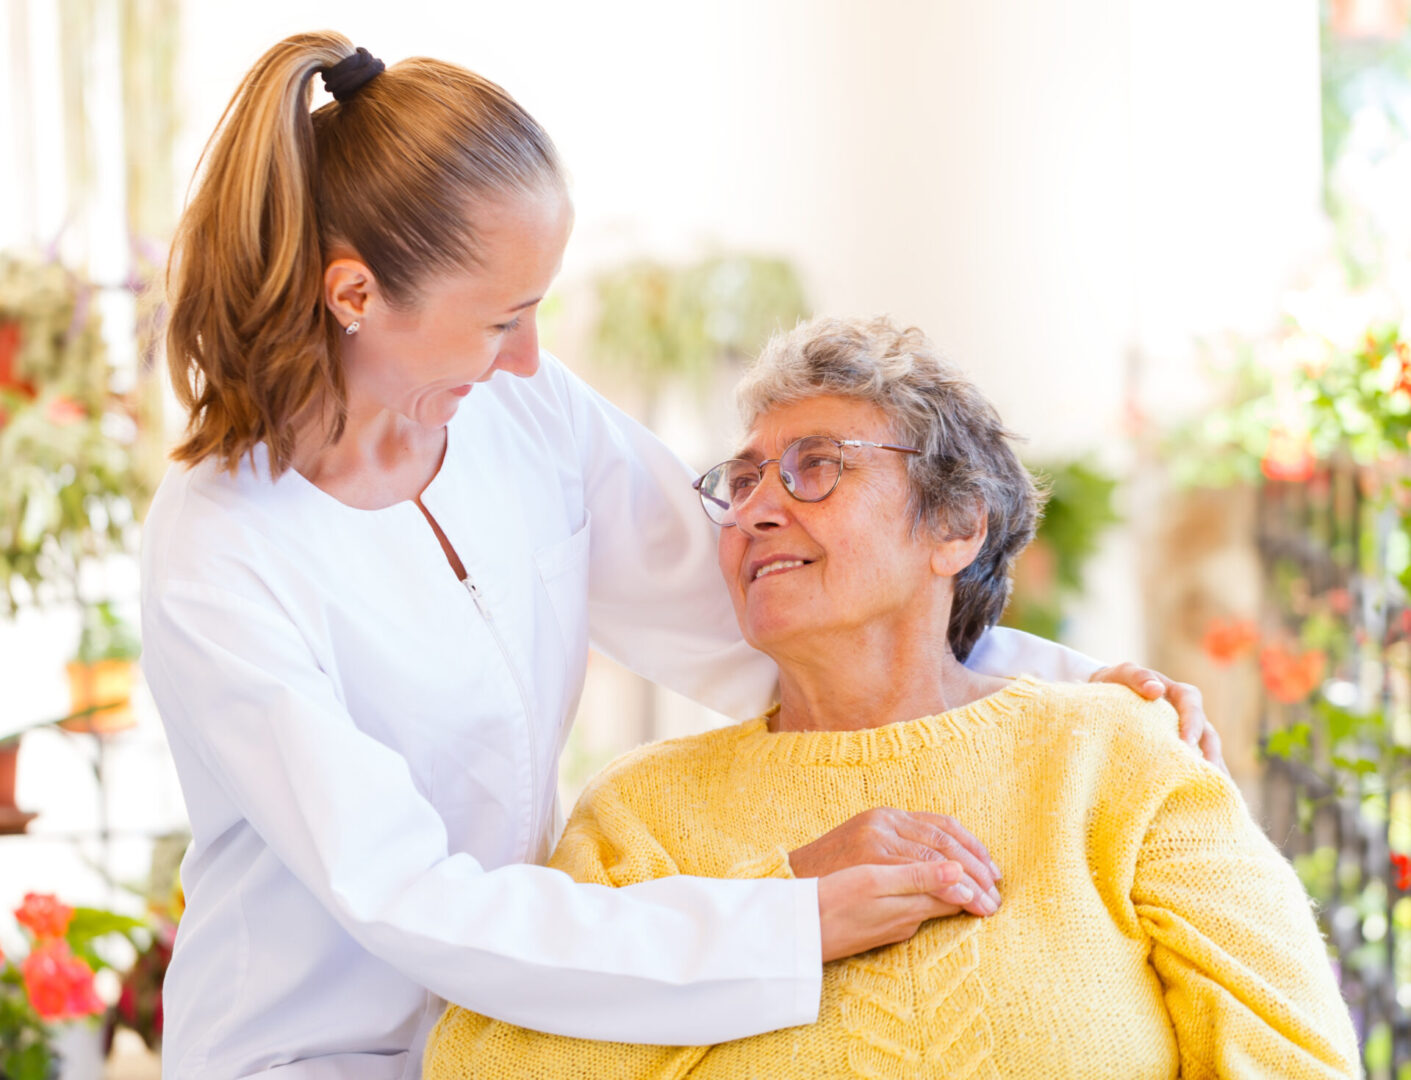 A woman is hugging an older person